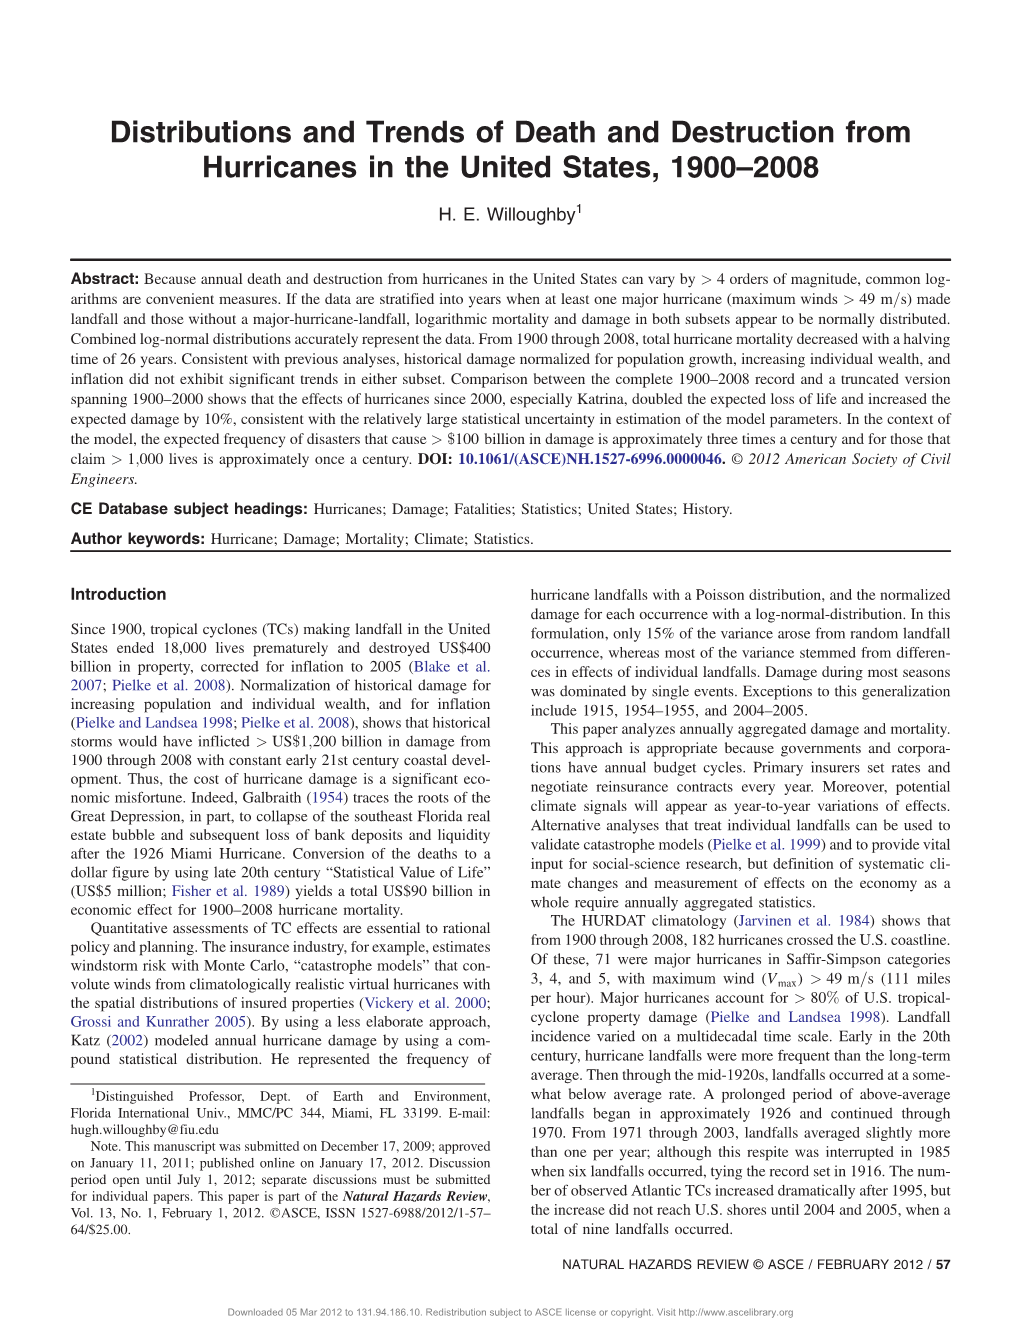 Distributions and Trends of Death and Destruction from Hurricanes in the United States, 1900–2008